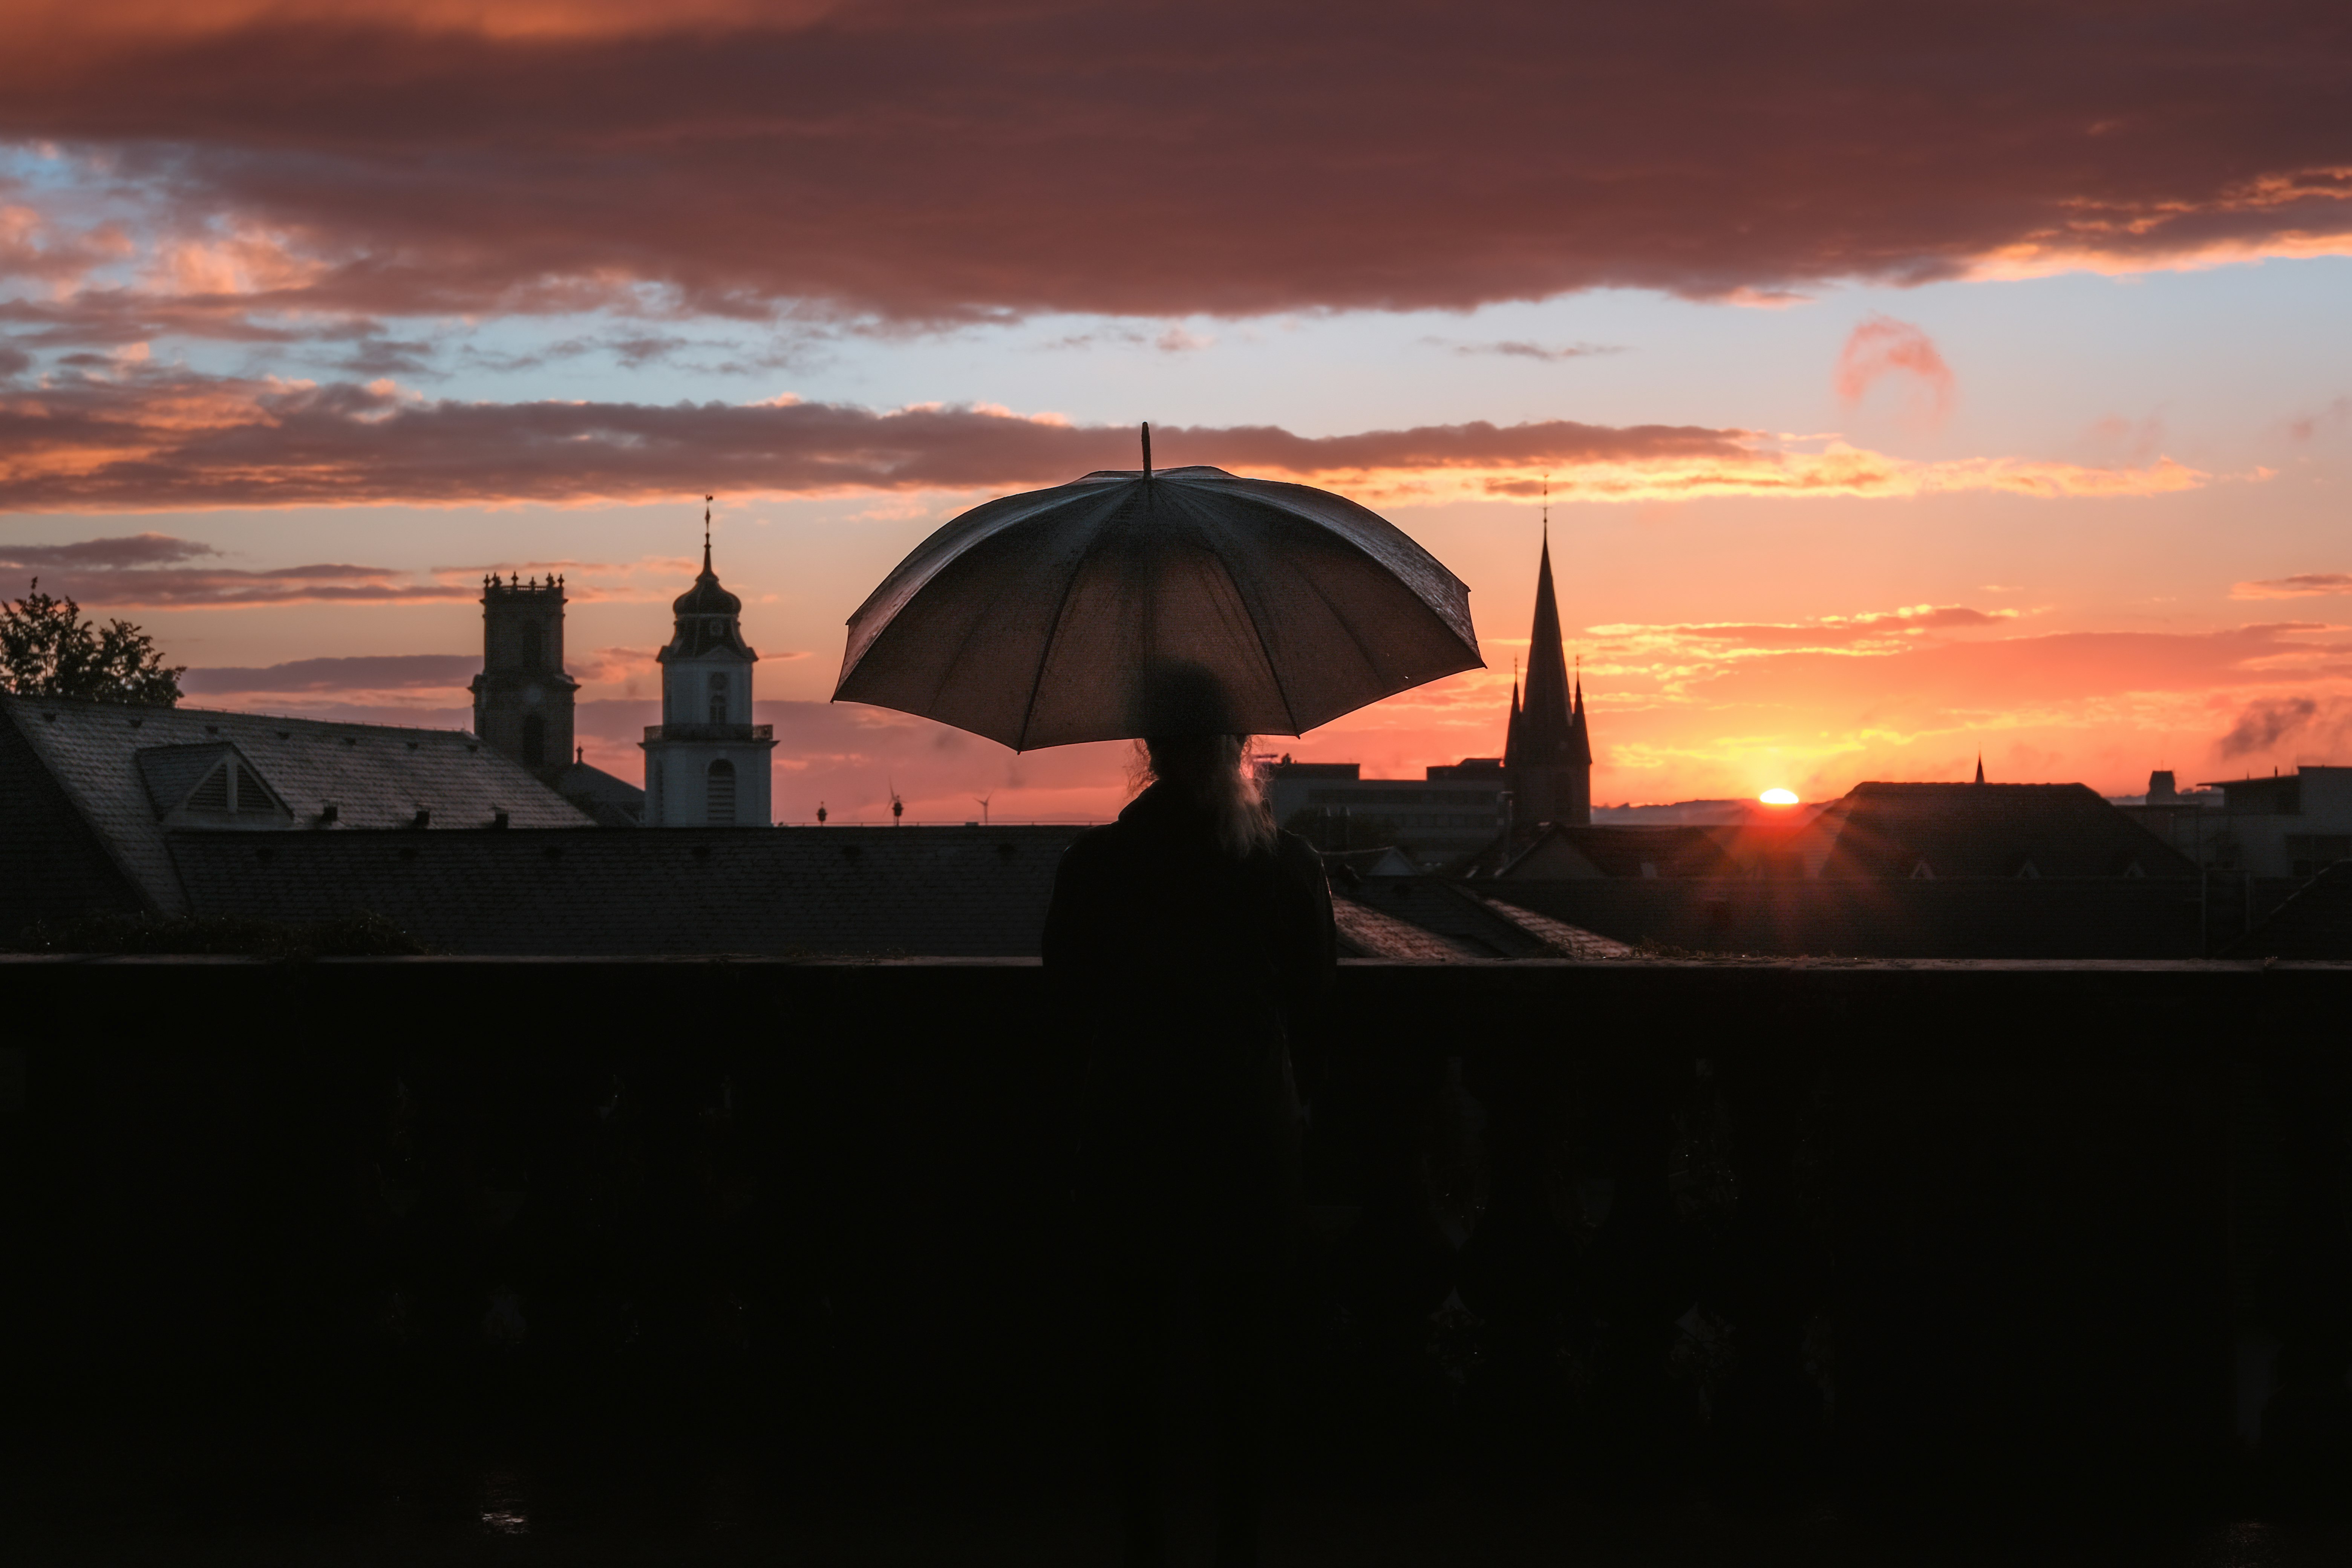 silhouette of person under umbrella during sunset